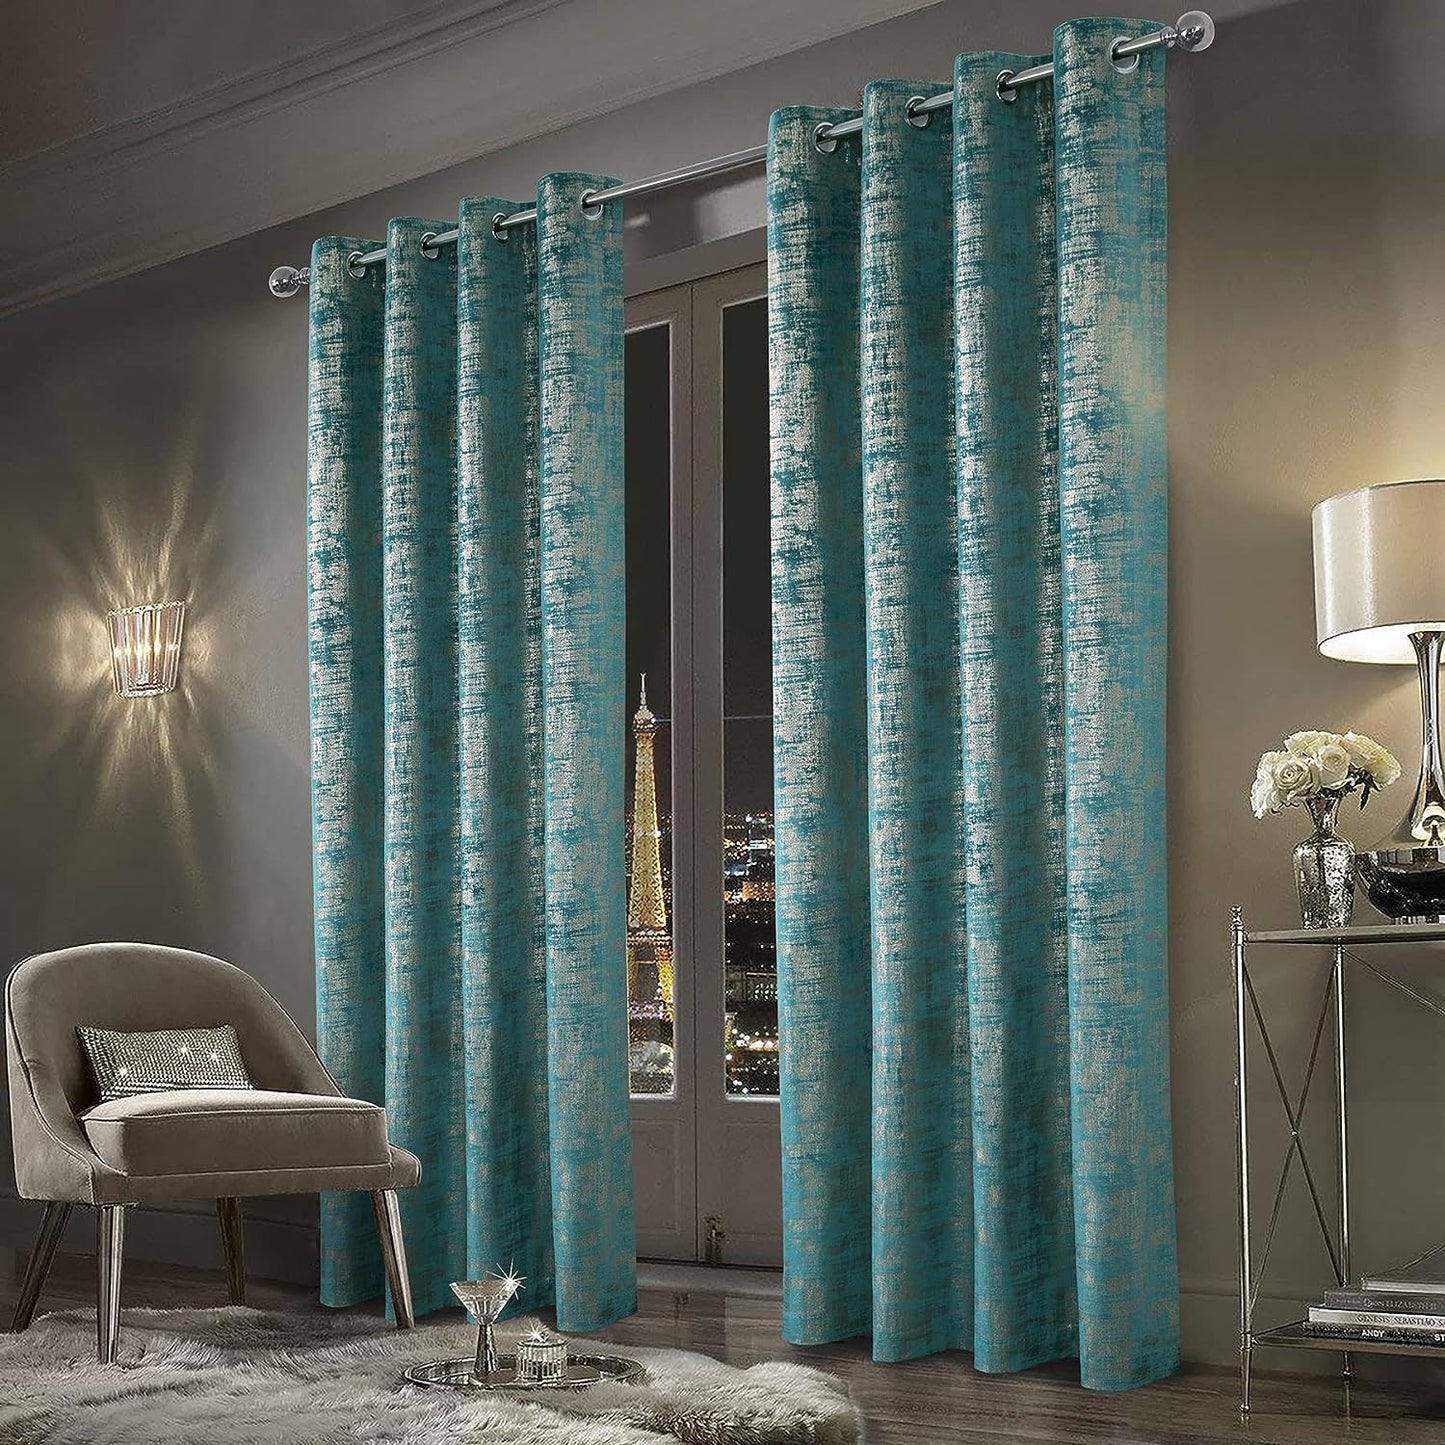 Always4U Soft Velvet Curtains 95 Inch Length Luxury Bedroom Curtains Gold Foil Print Window Curtains for Living Room 1 Panel White  always4u Teal (Gold Print) 2 Panels: 52''W*95''L 